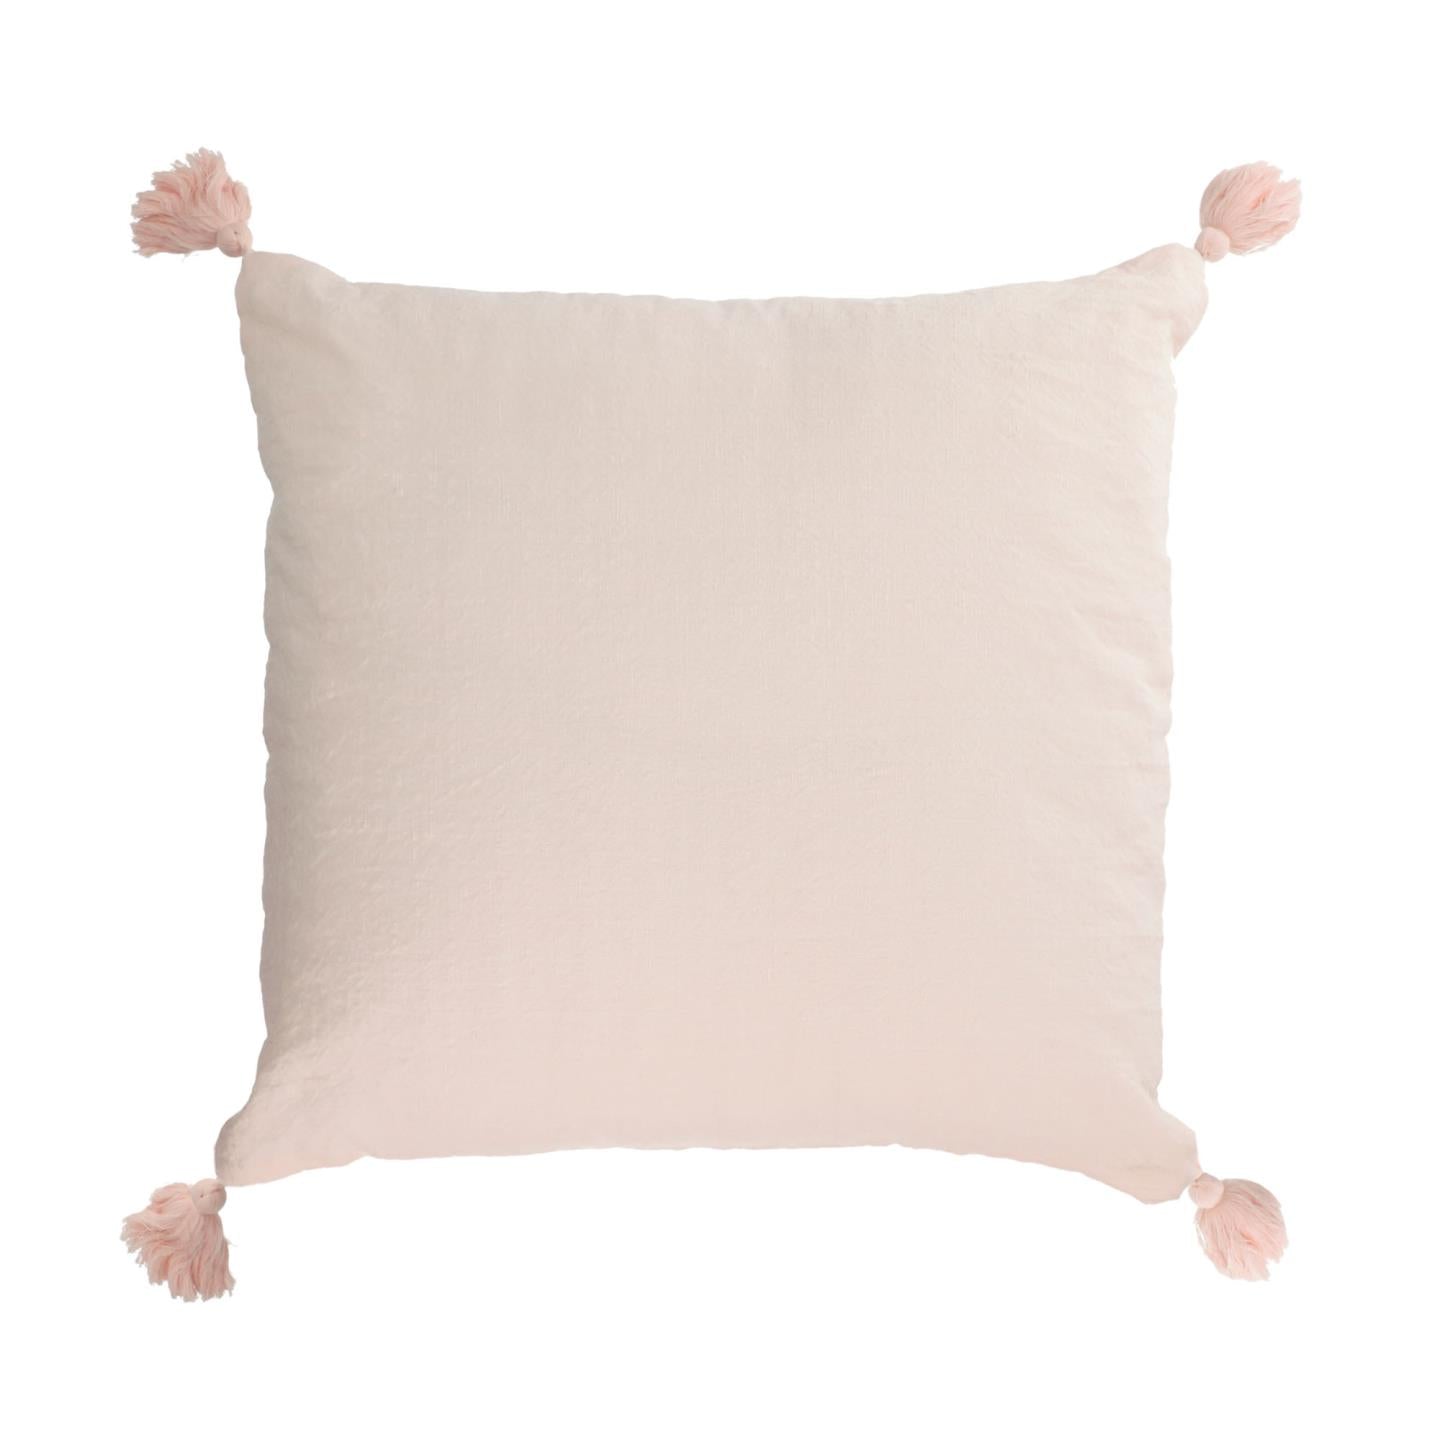 Eirenne cotton and linen cushion cover in pink 45 x 45 cm